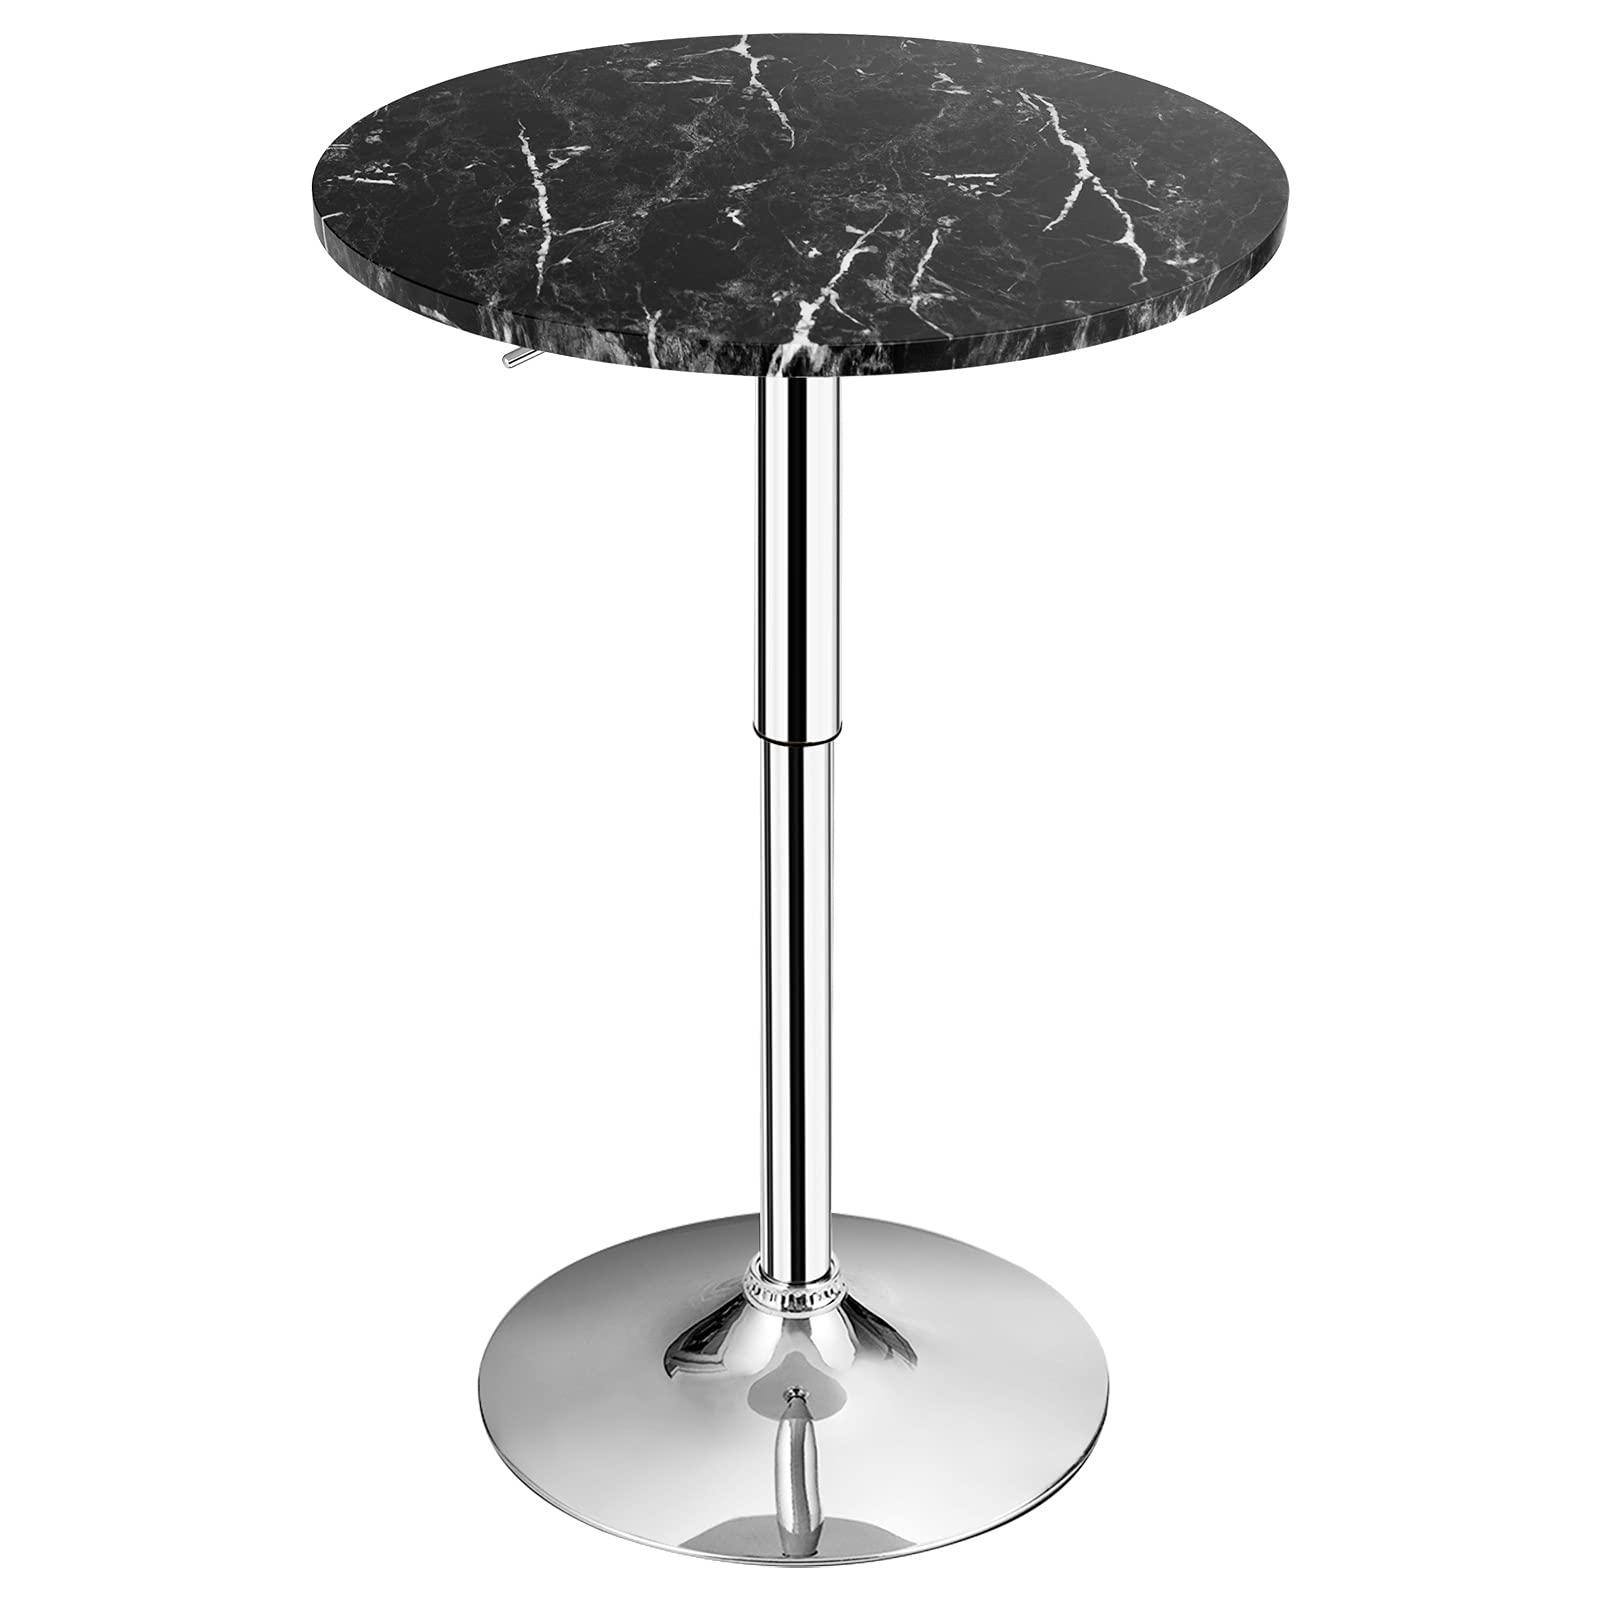 Giantex Round Pub Table Height Adjustable, 360 Degree Swivel Cocktail Pub Table with Sliver Leg and Base for Home, Office Bar Table